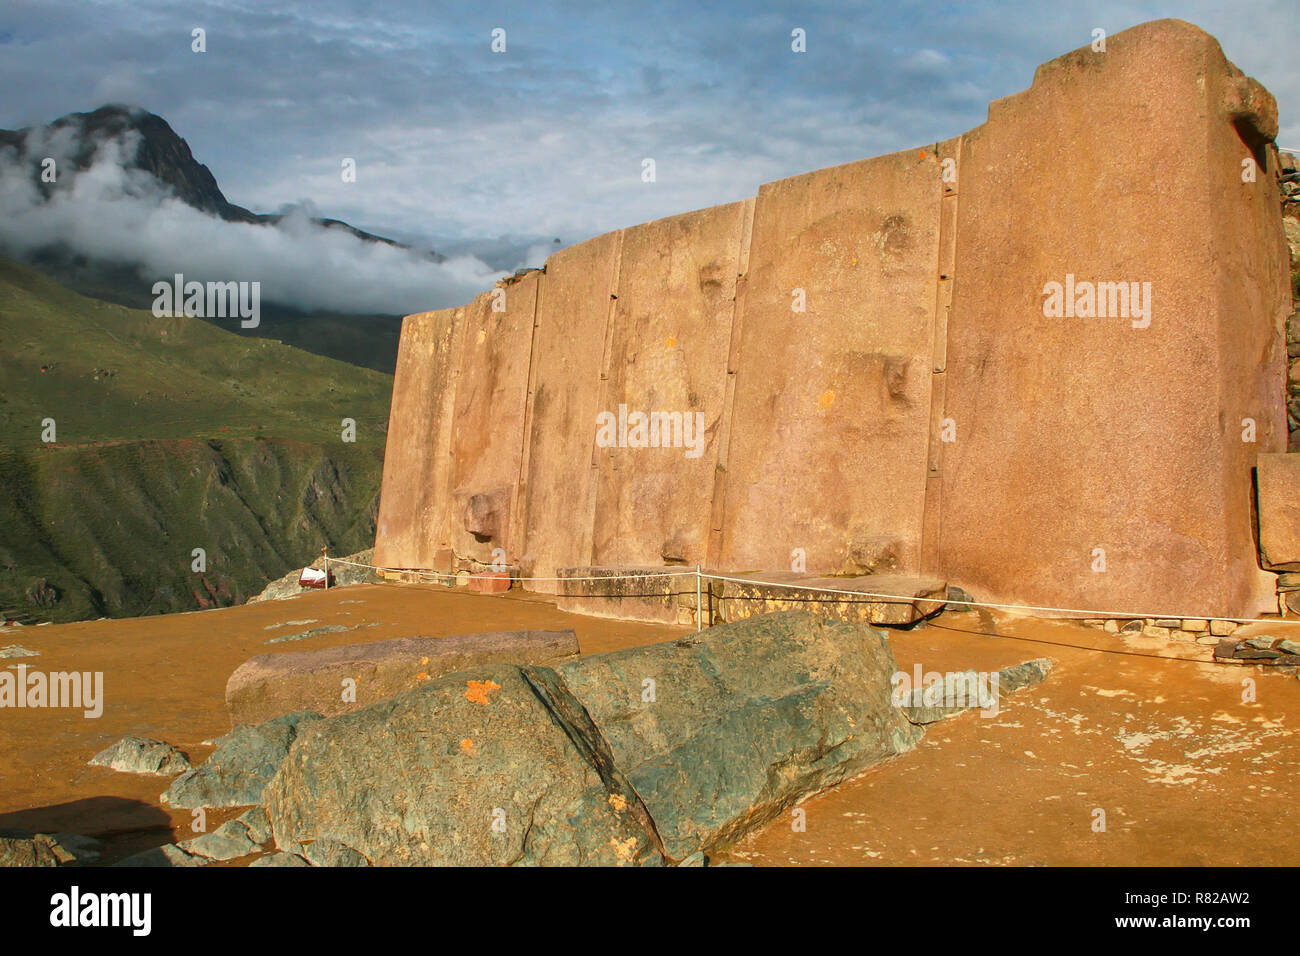 Wall of the Six Monoliths at Inca Fortress in Ollantaytambo, Peru. Ollantaytambo was the royal estate of Emperor Pachacuti who conquered the region. Stock Photo